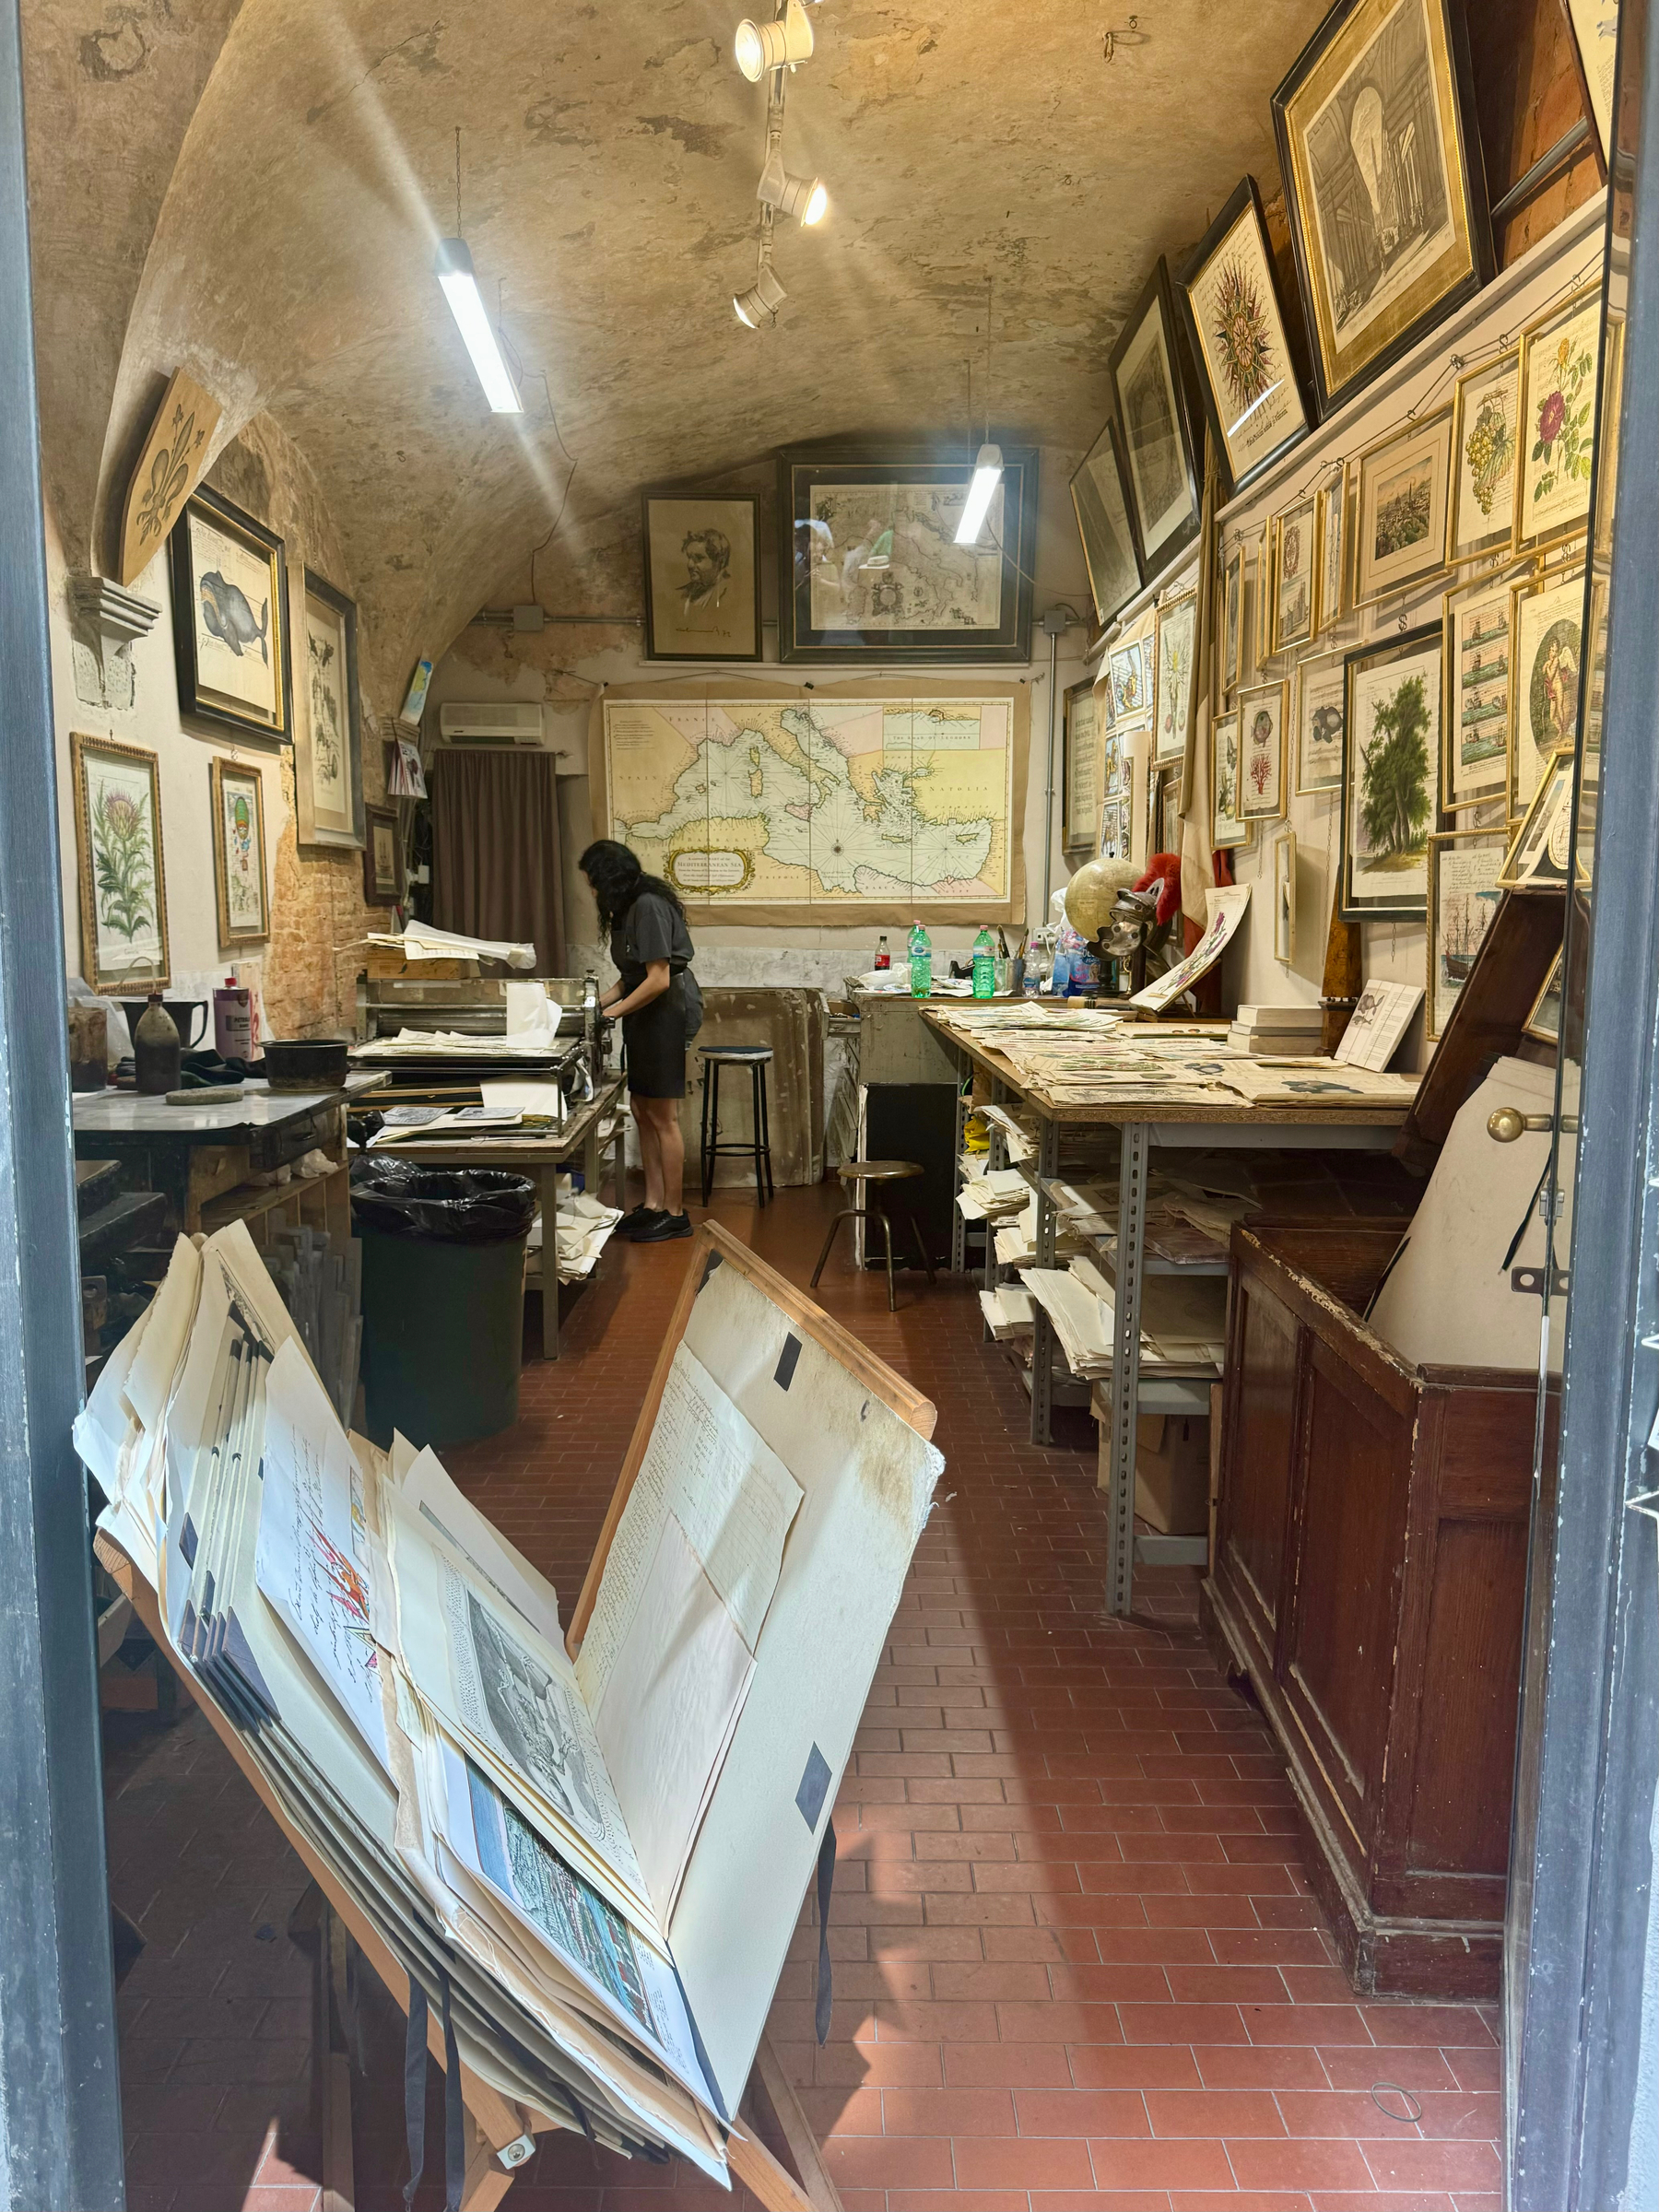 A small, cozy art studio with arched ceilings and exposed brick walls. The walls are adorned with various framed artworks, including botanical prints, portraits, and maps. A person is working at a table toward the back of the room. 